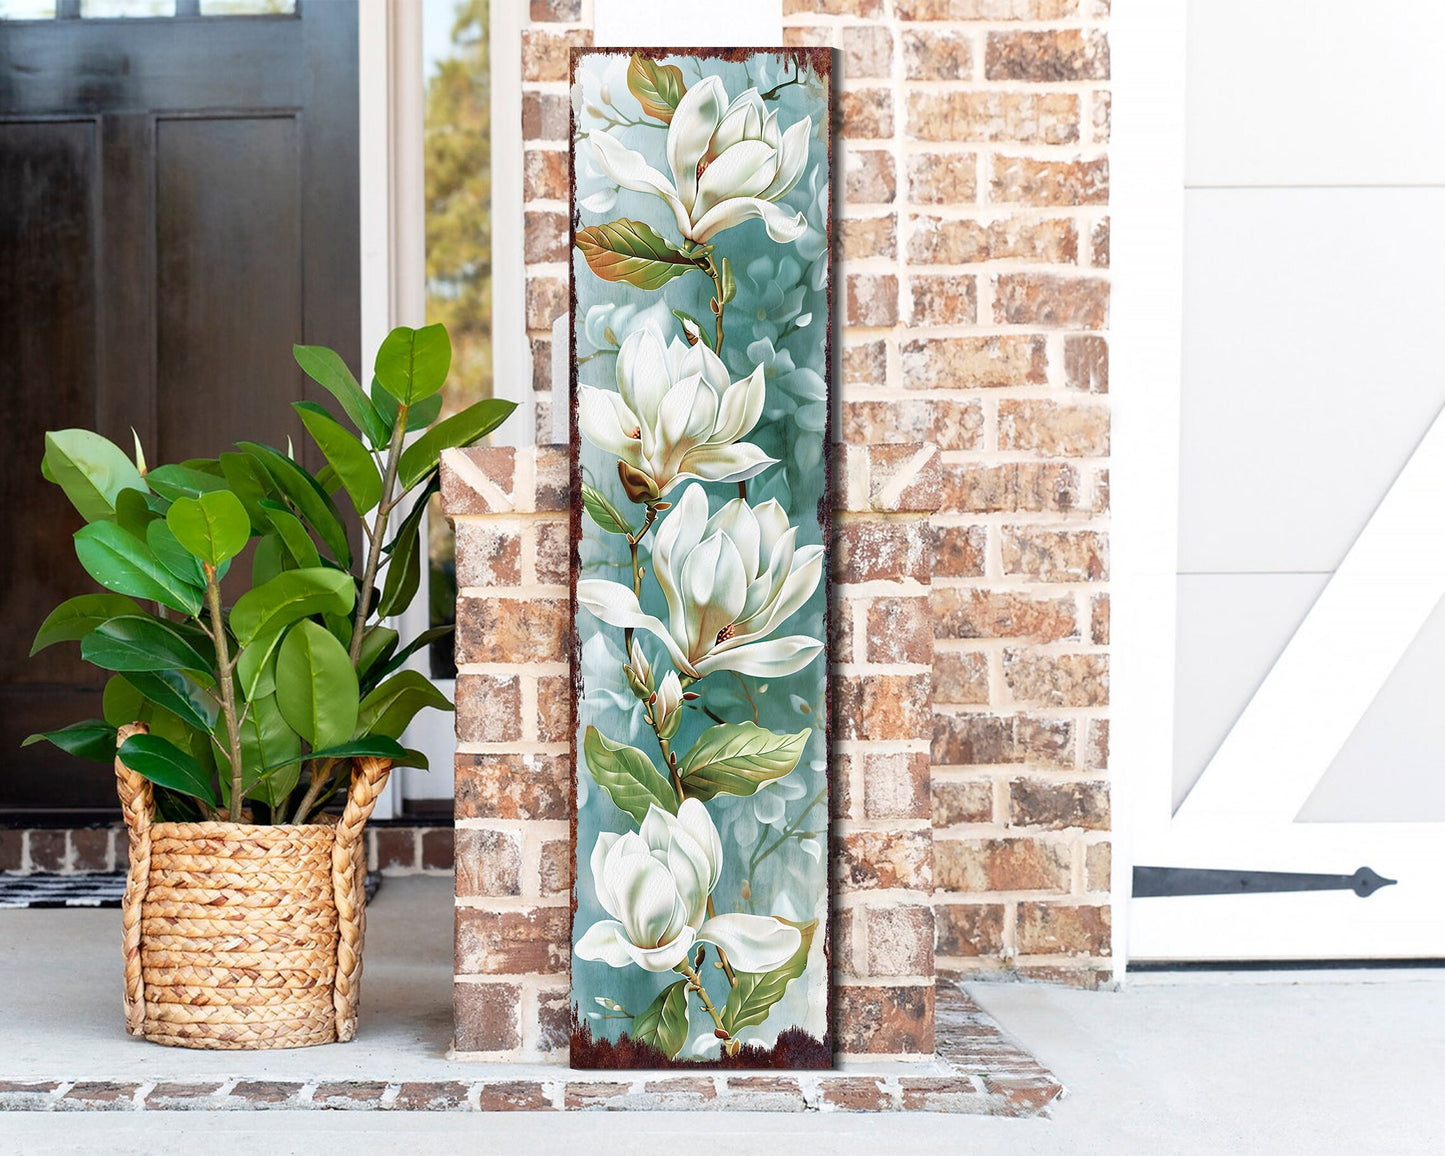 36in Spring Magnolia Porch Sign  Playful Watercolor White Magnolia  Light Blue Background for Entryway, Front Door, Porch Home Decor